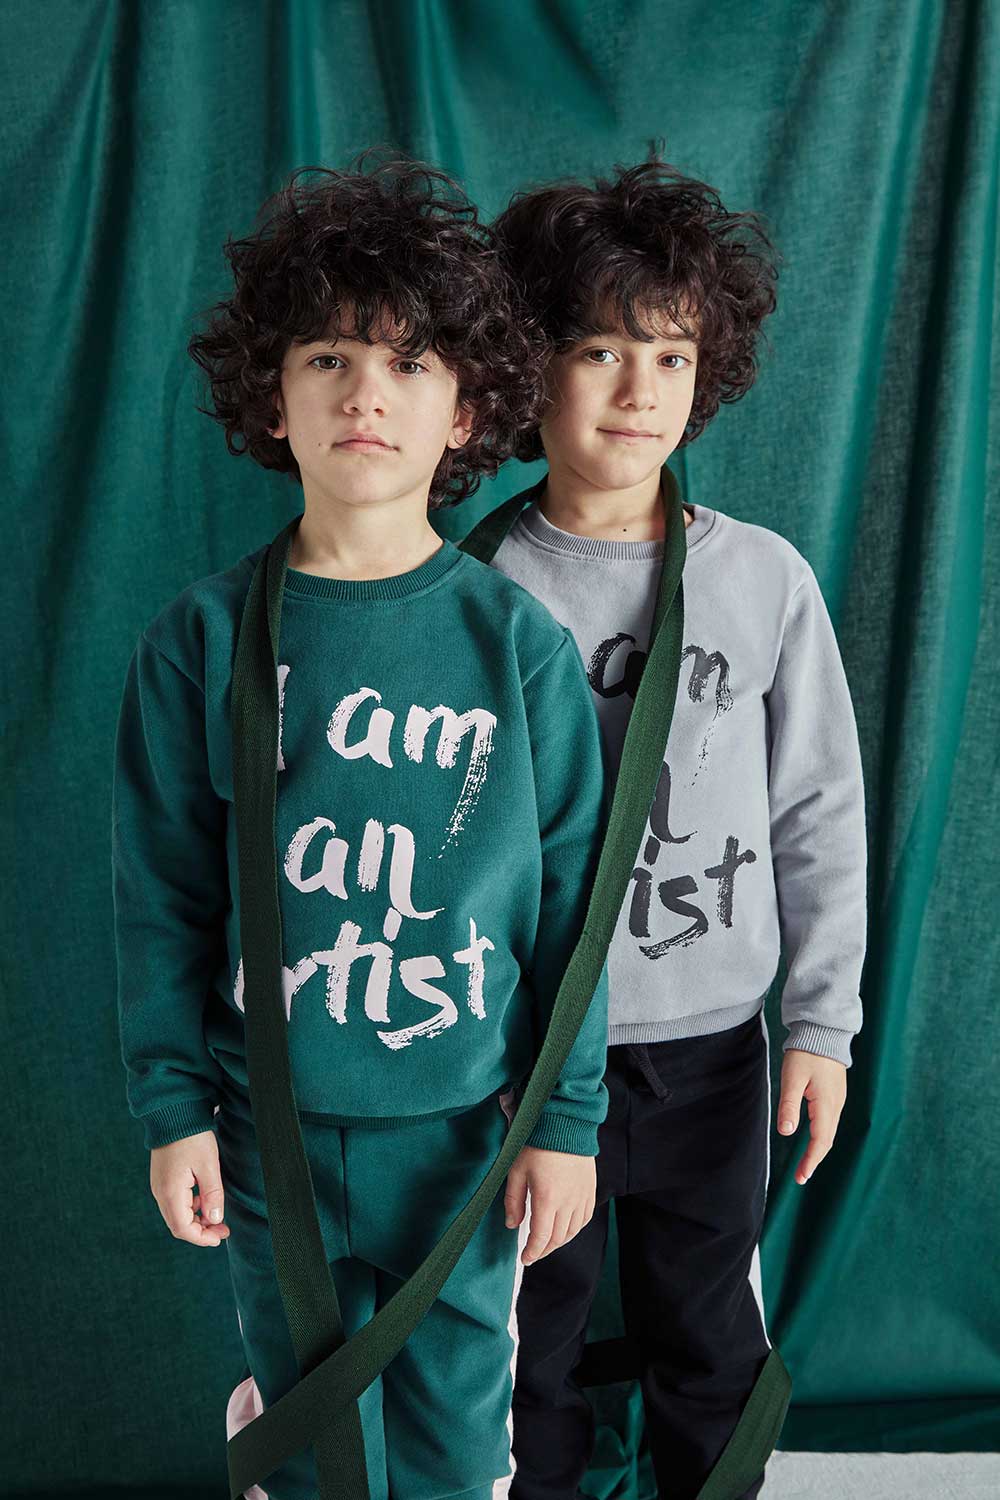 Small Stories teams with influencers to launch AW19 collection for grown-ups